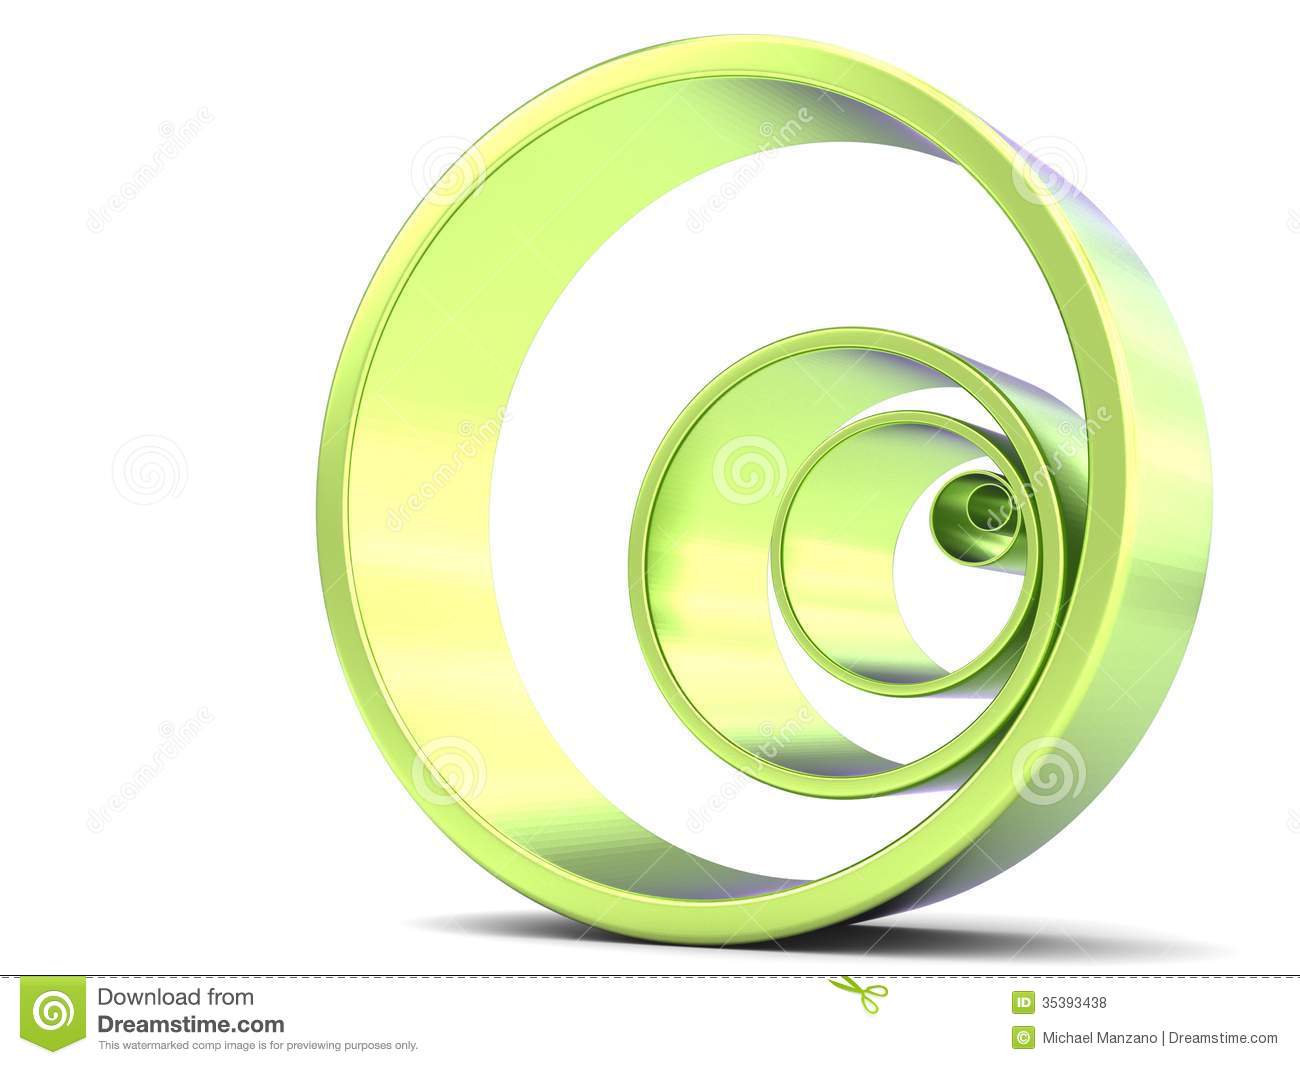 An Abstract Illustration Of Multiple Green Rings Inside Each Other On